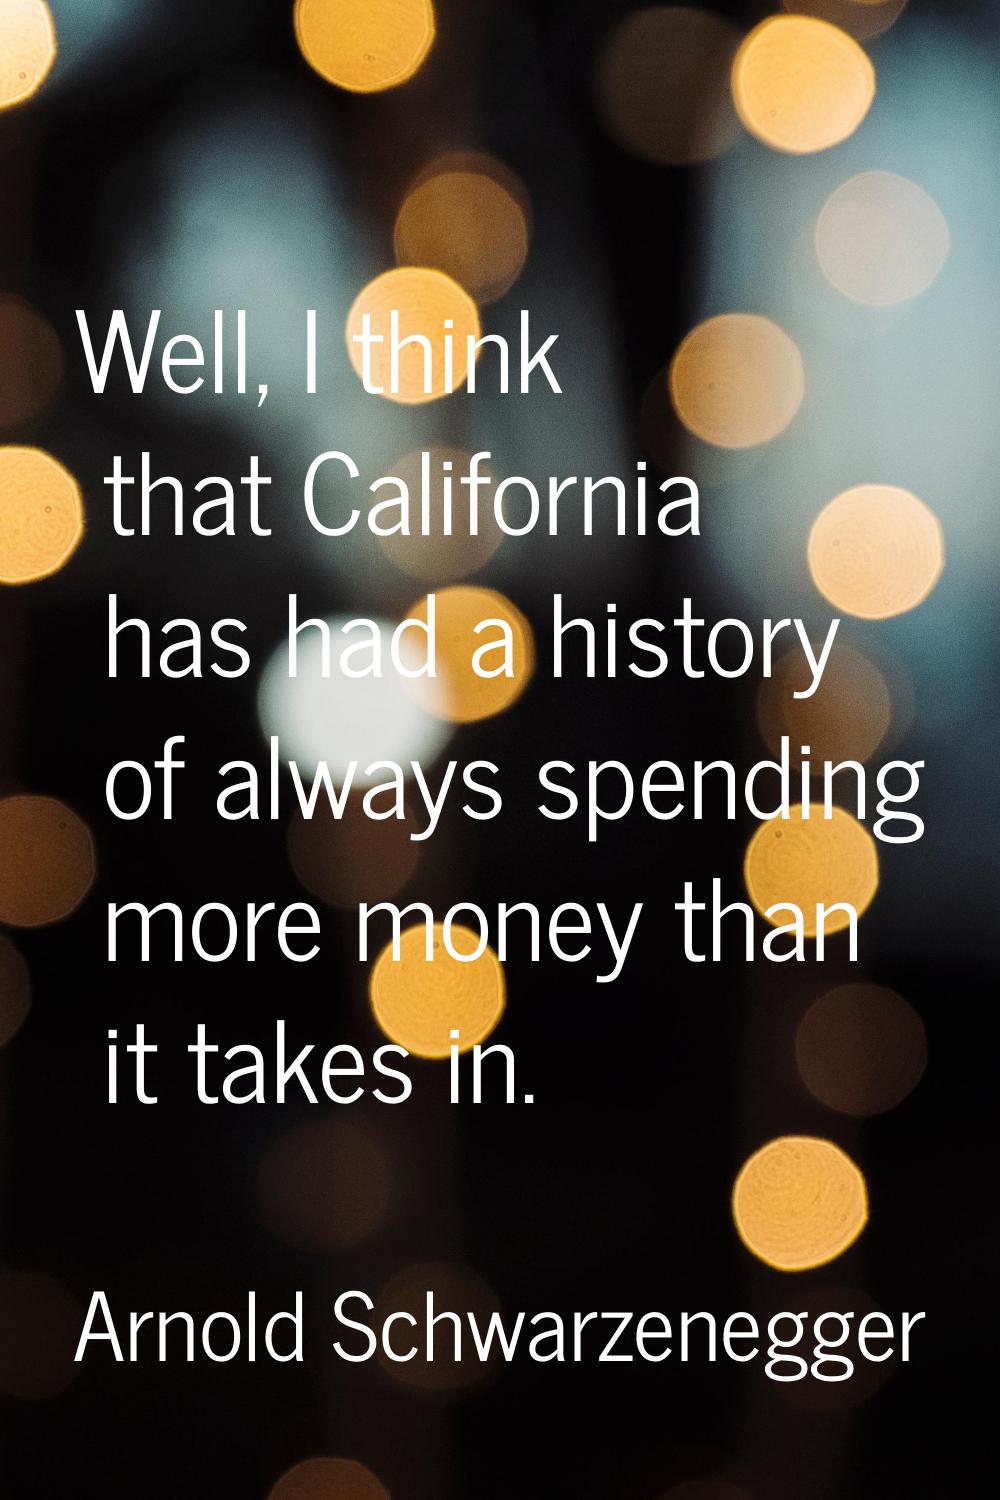 Well, I think that California has had a history of always spending more money than it takes in.